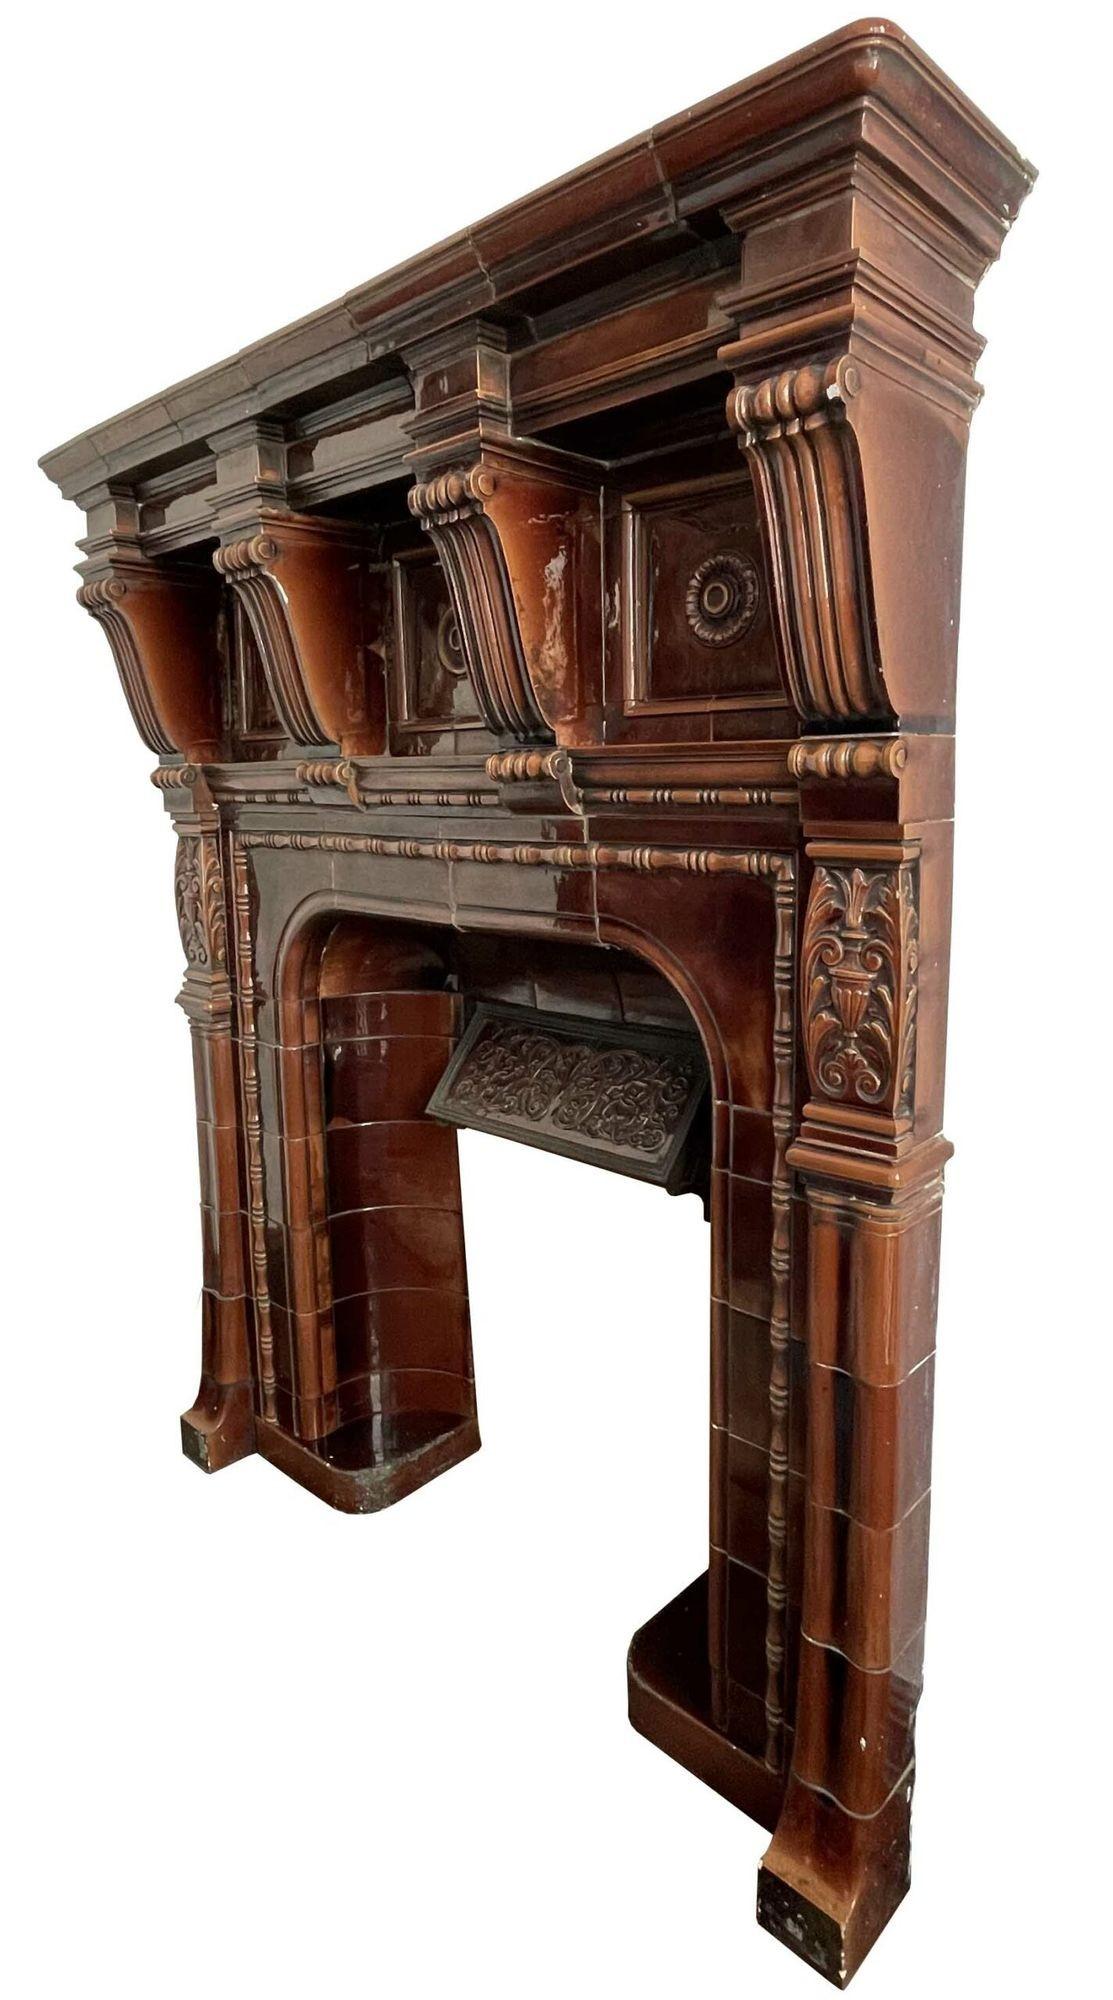 This is one of three similar antique fire mantels recently salvaged from a property in the East of England. It is most likely made by Doulton. It features a two-tone brown glaze.
 
Additional Dimensions 
Opening height 84 cm
Opening width 53.5